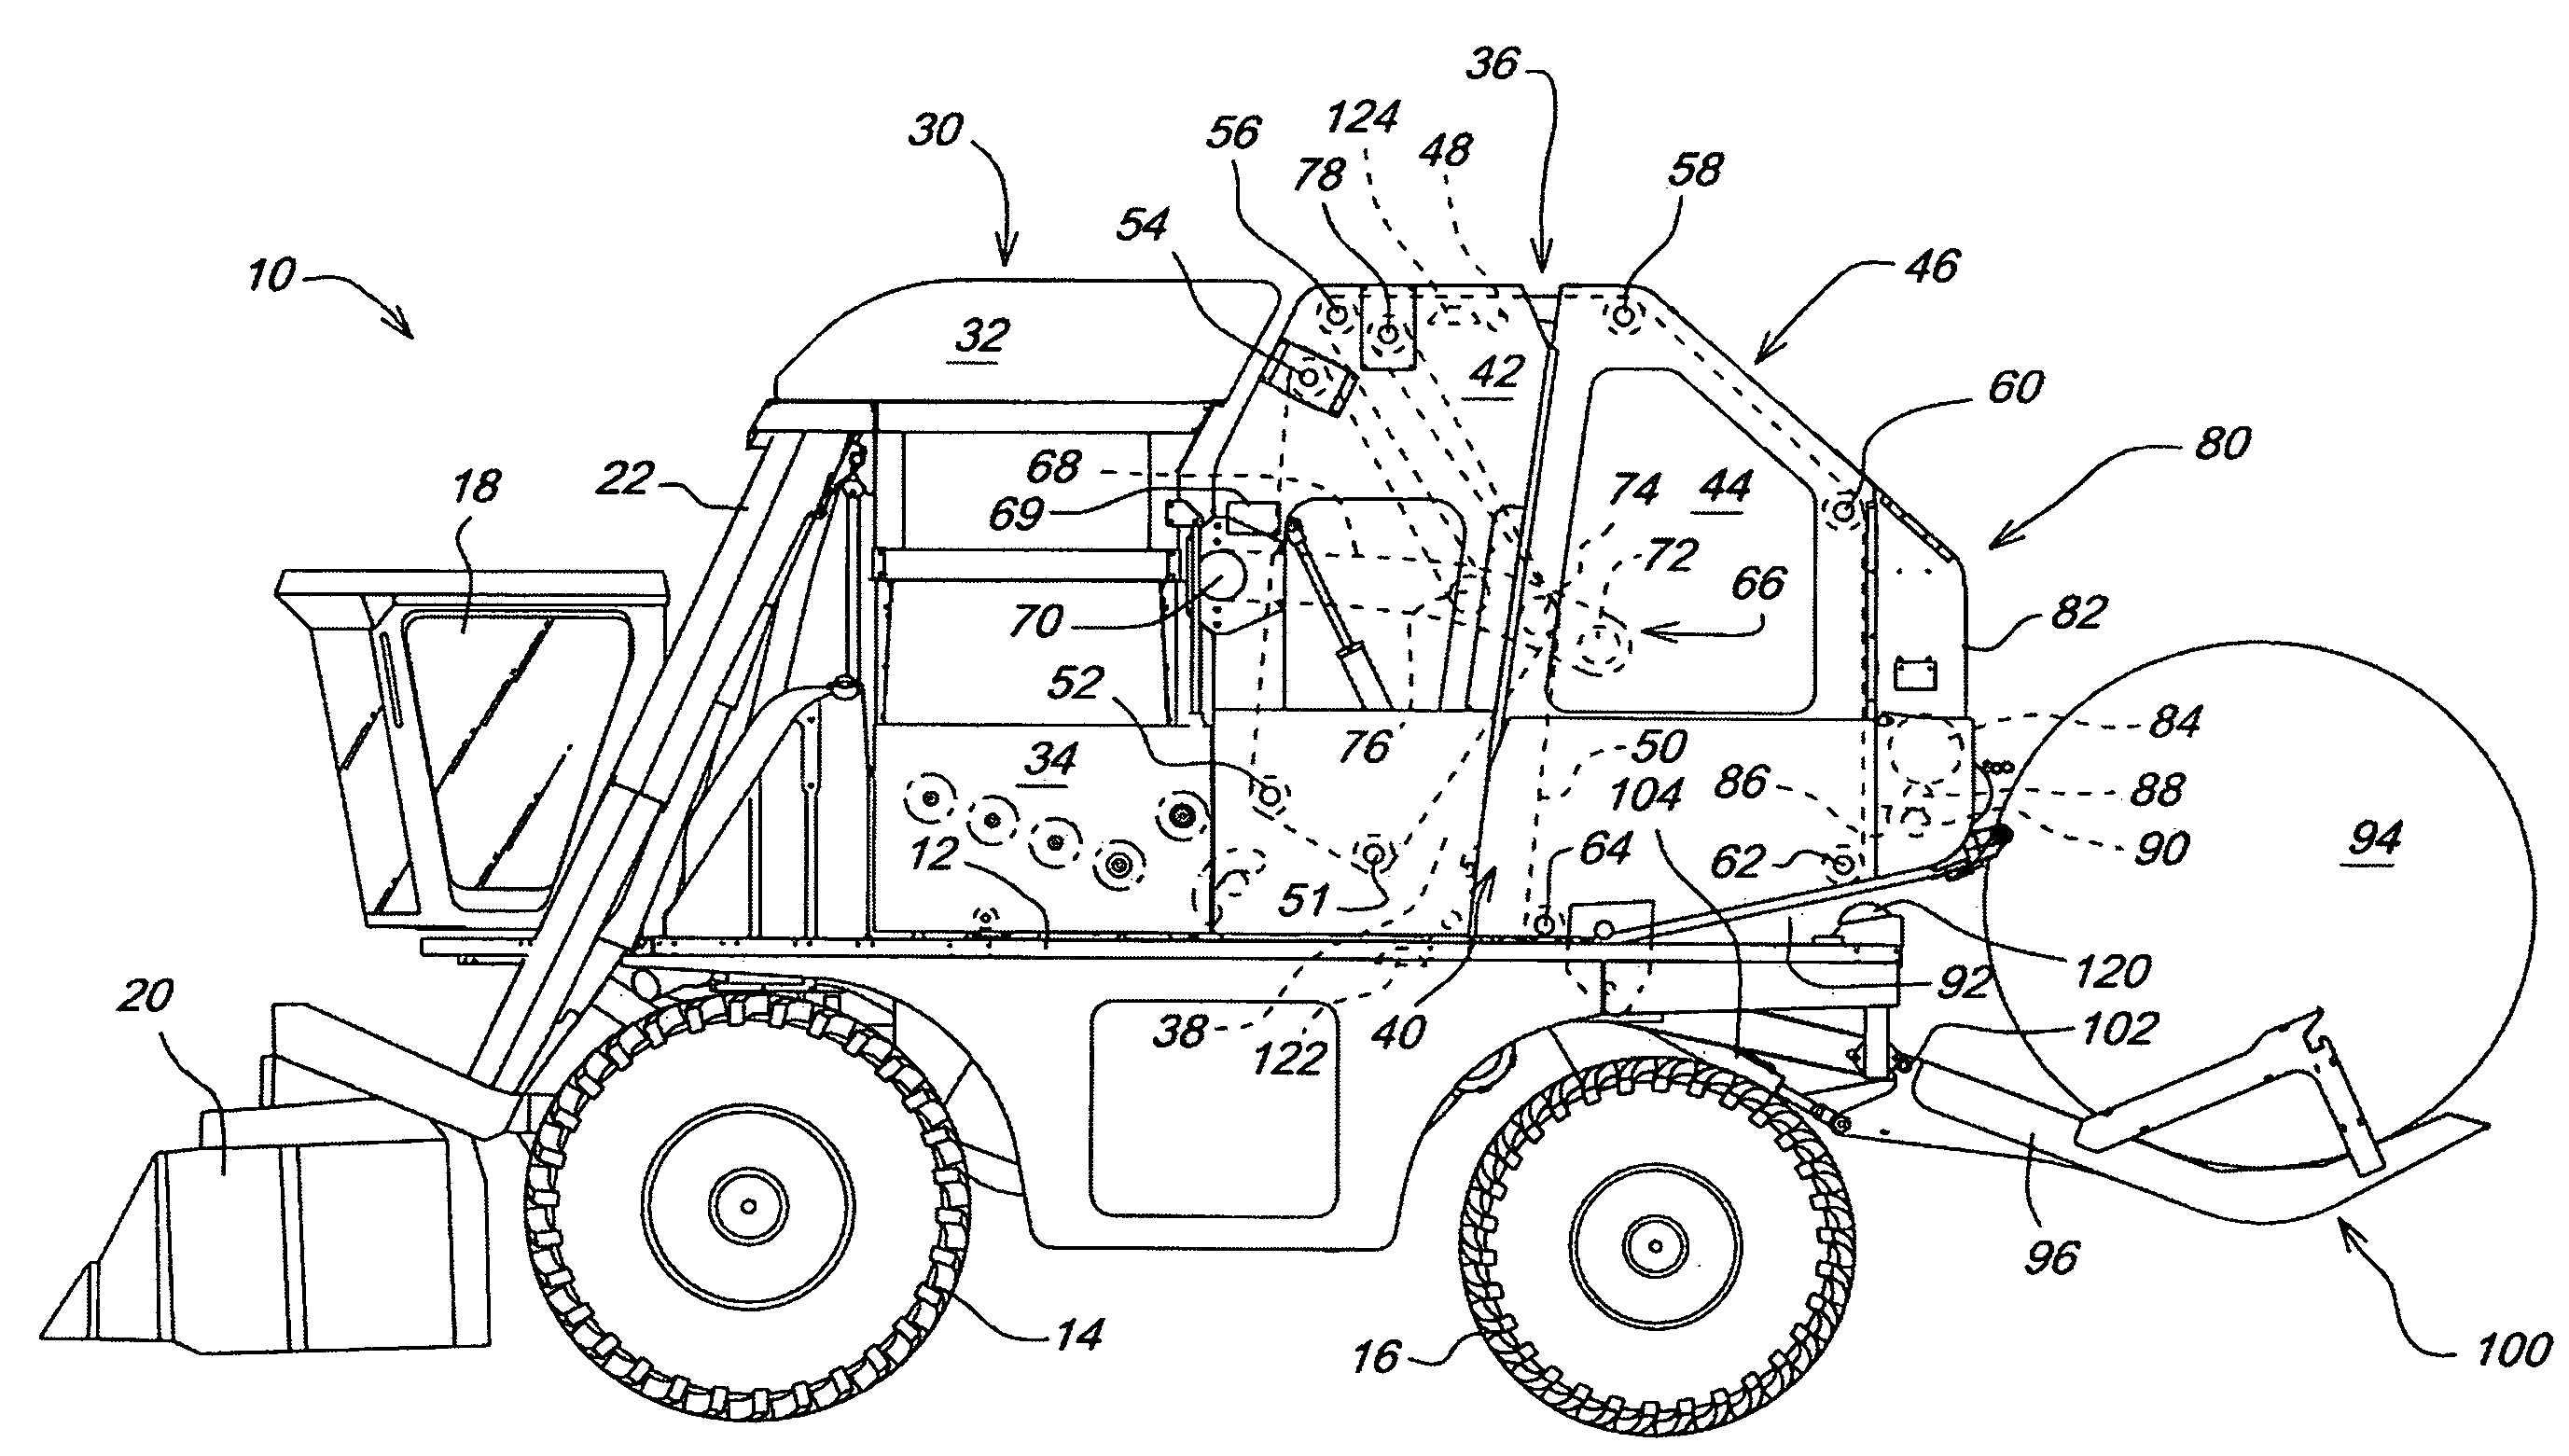 Cotton harvester for producing modules which can be automatically identified and oriented